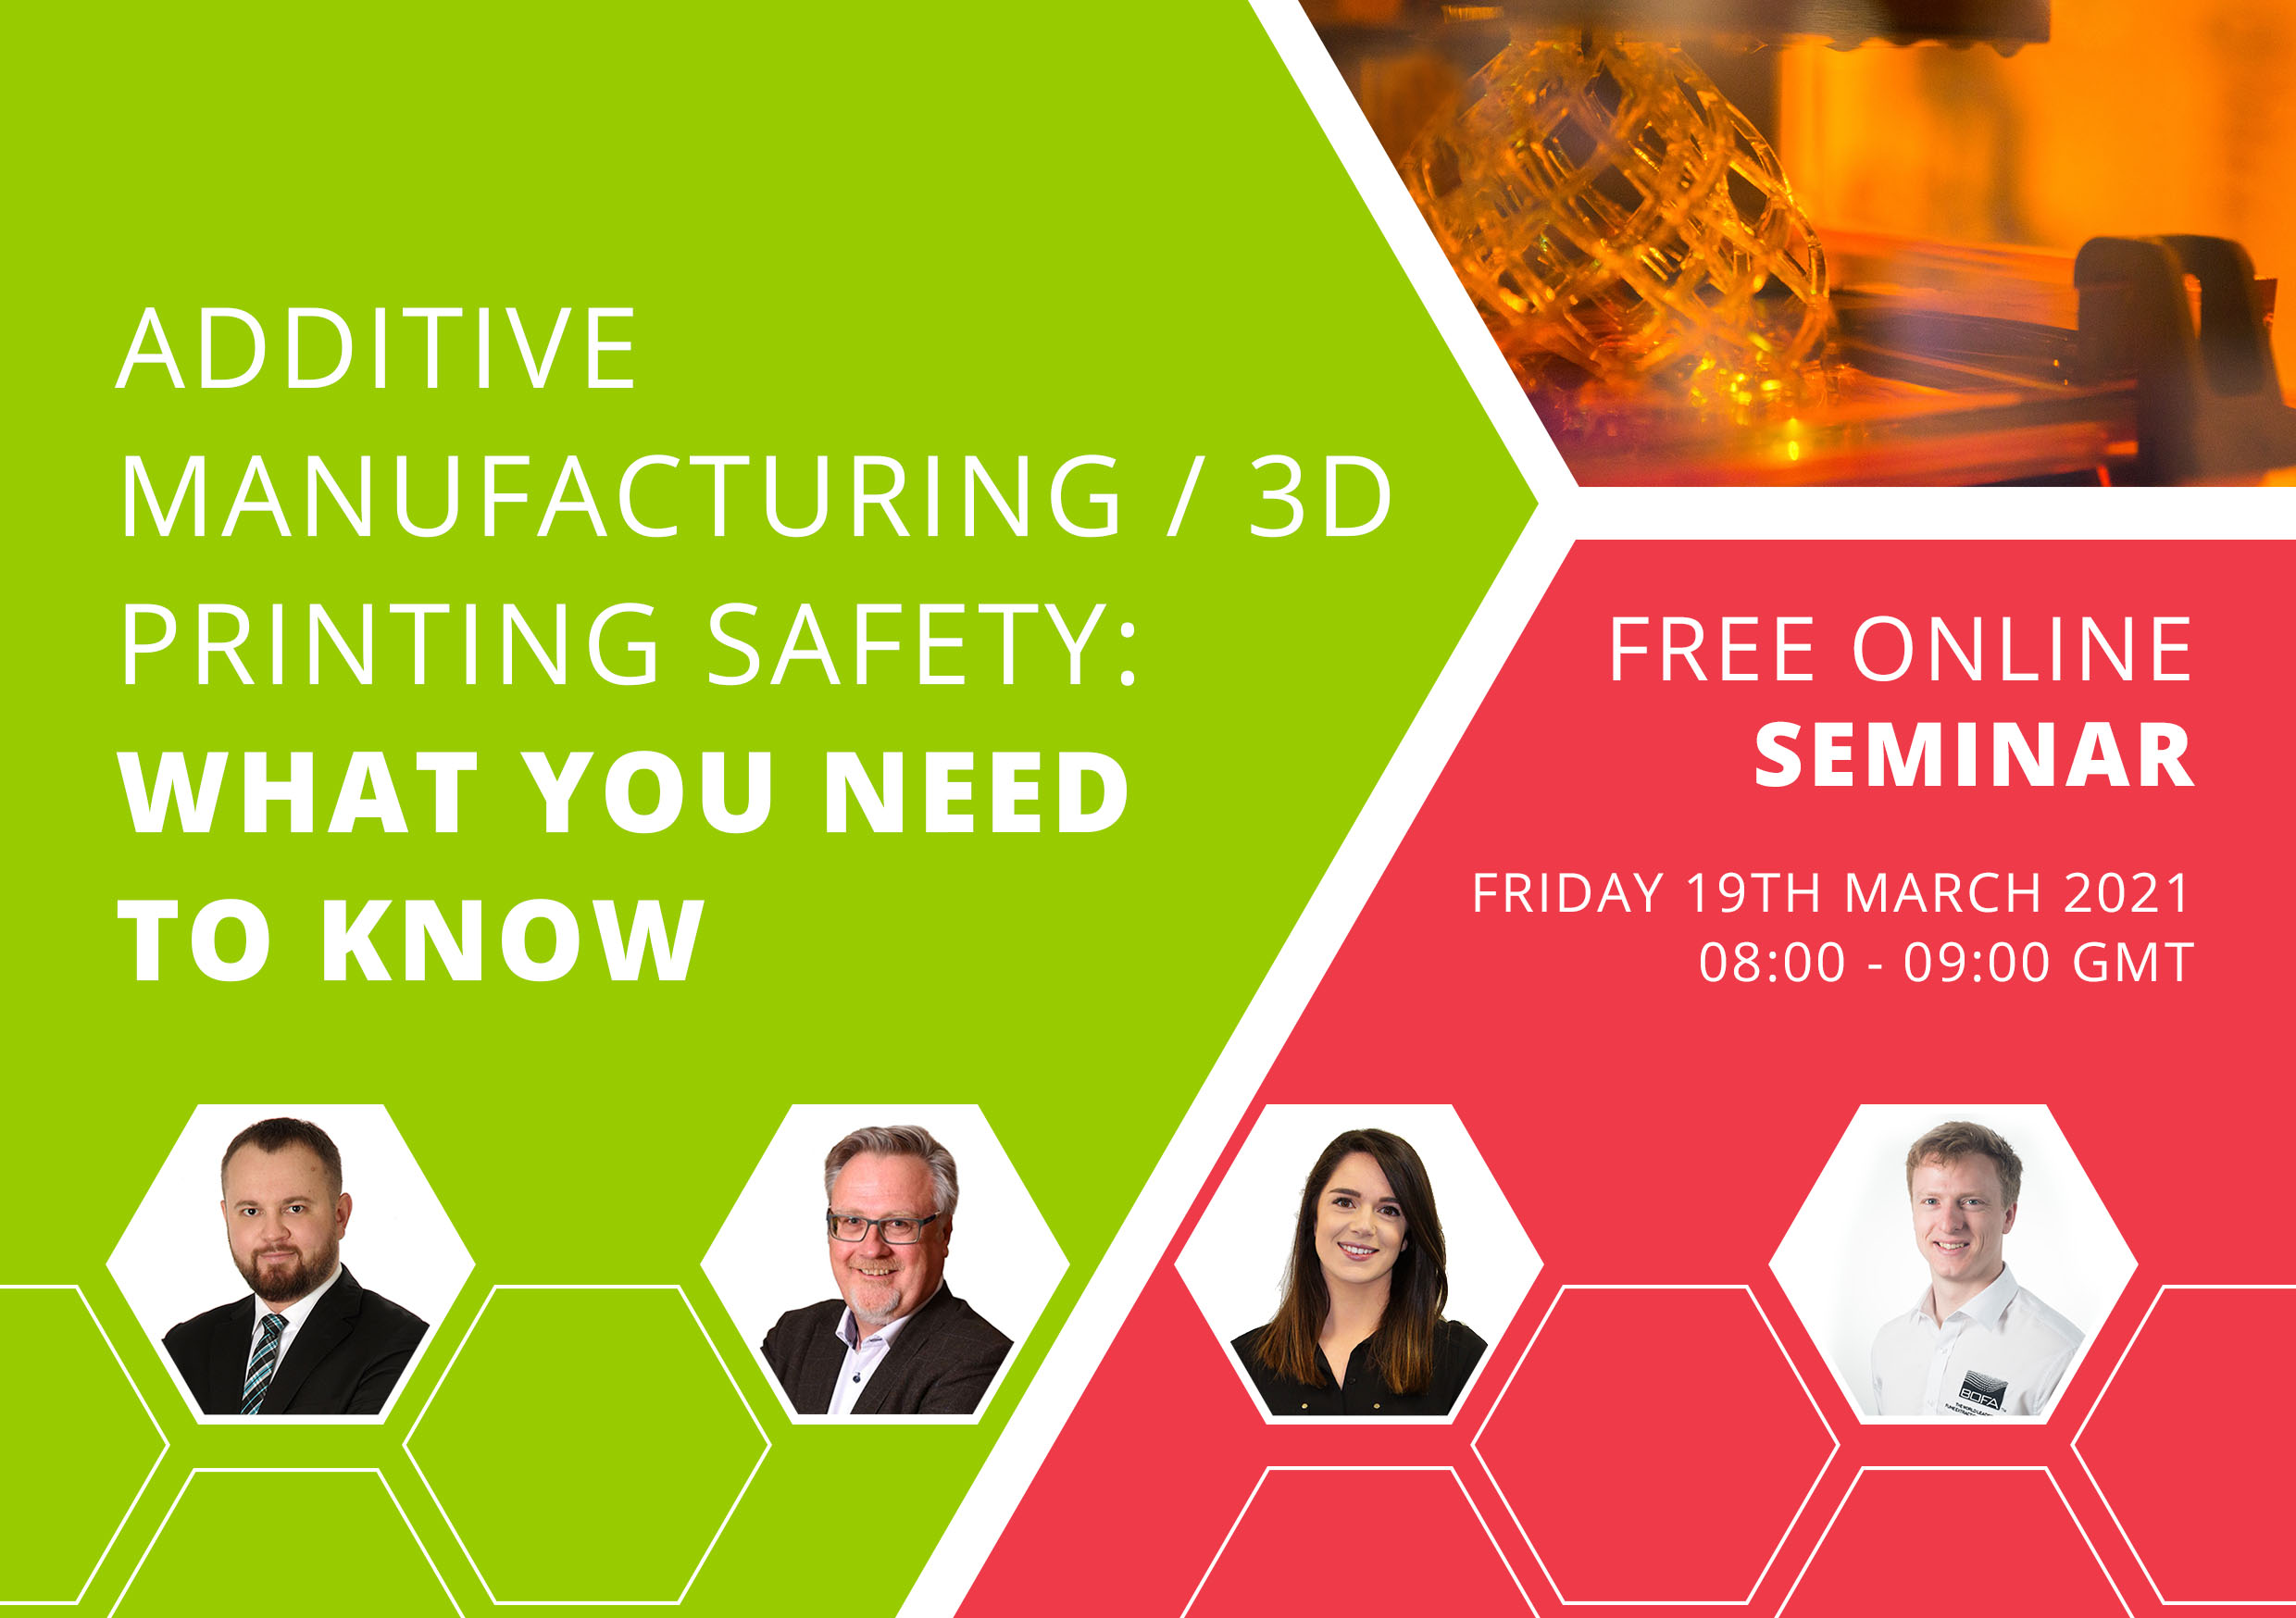 The seminar will explore the risks presented by emissions linked to processes such 3D metal printing and what can be done to mitigate these.